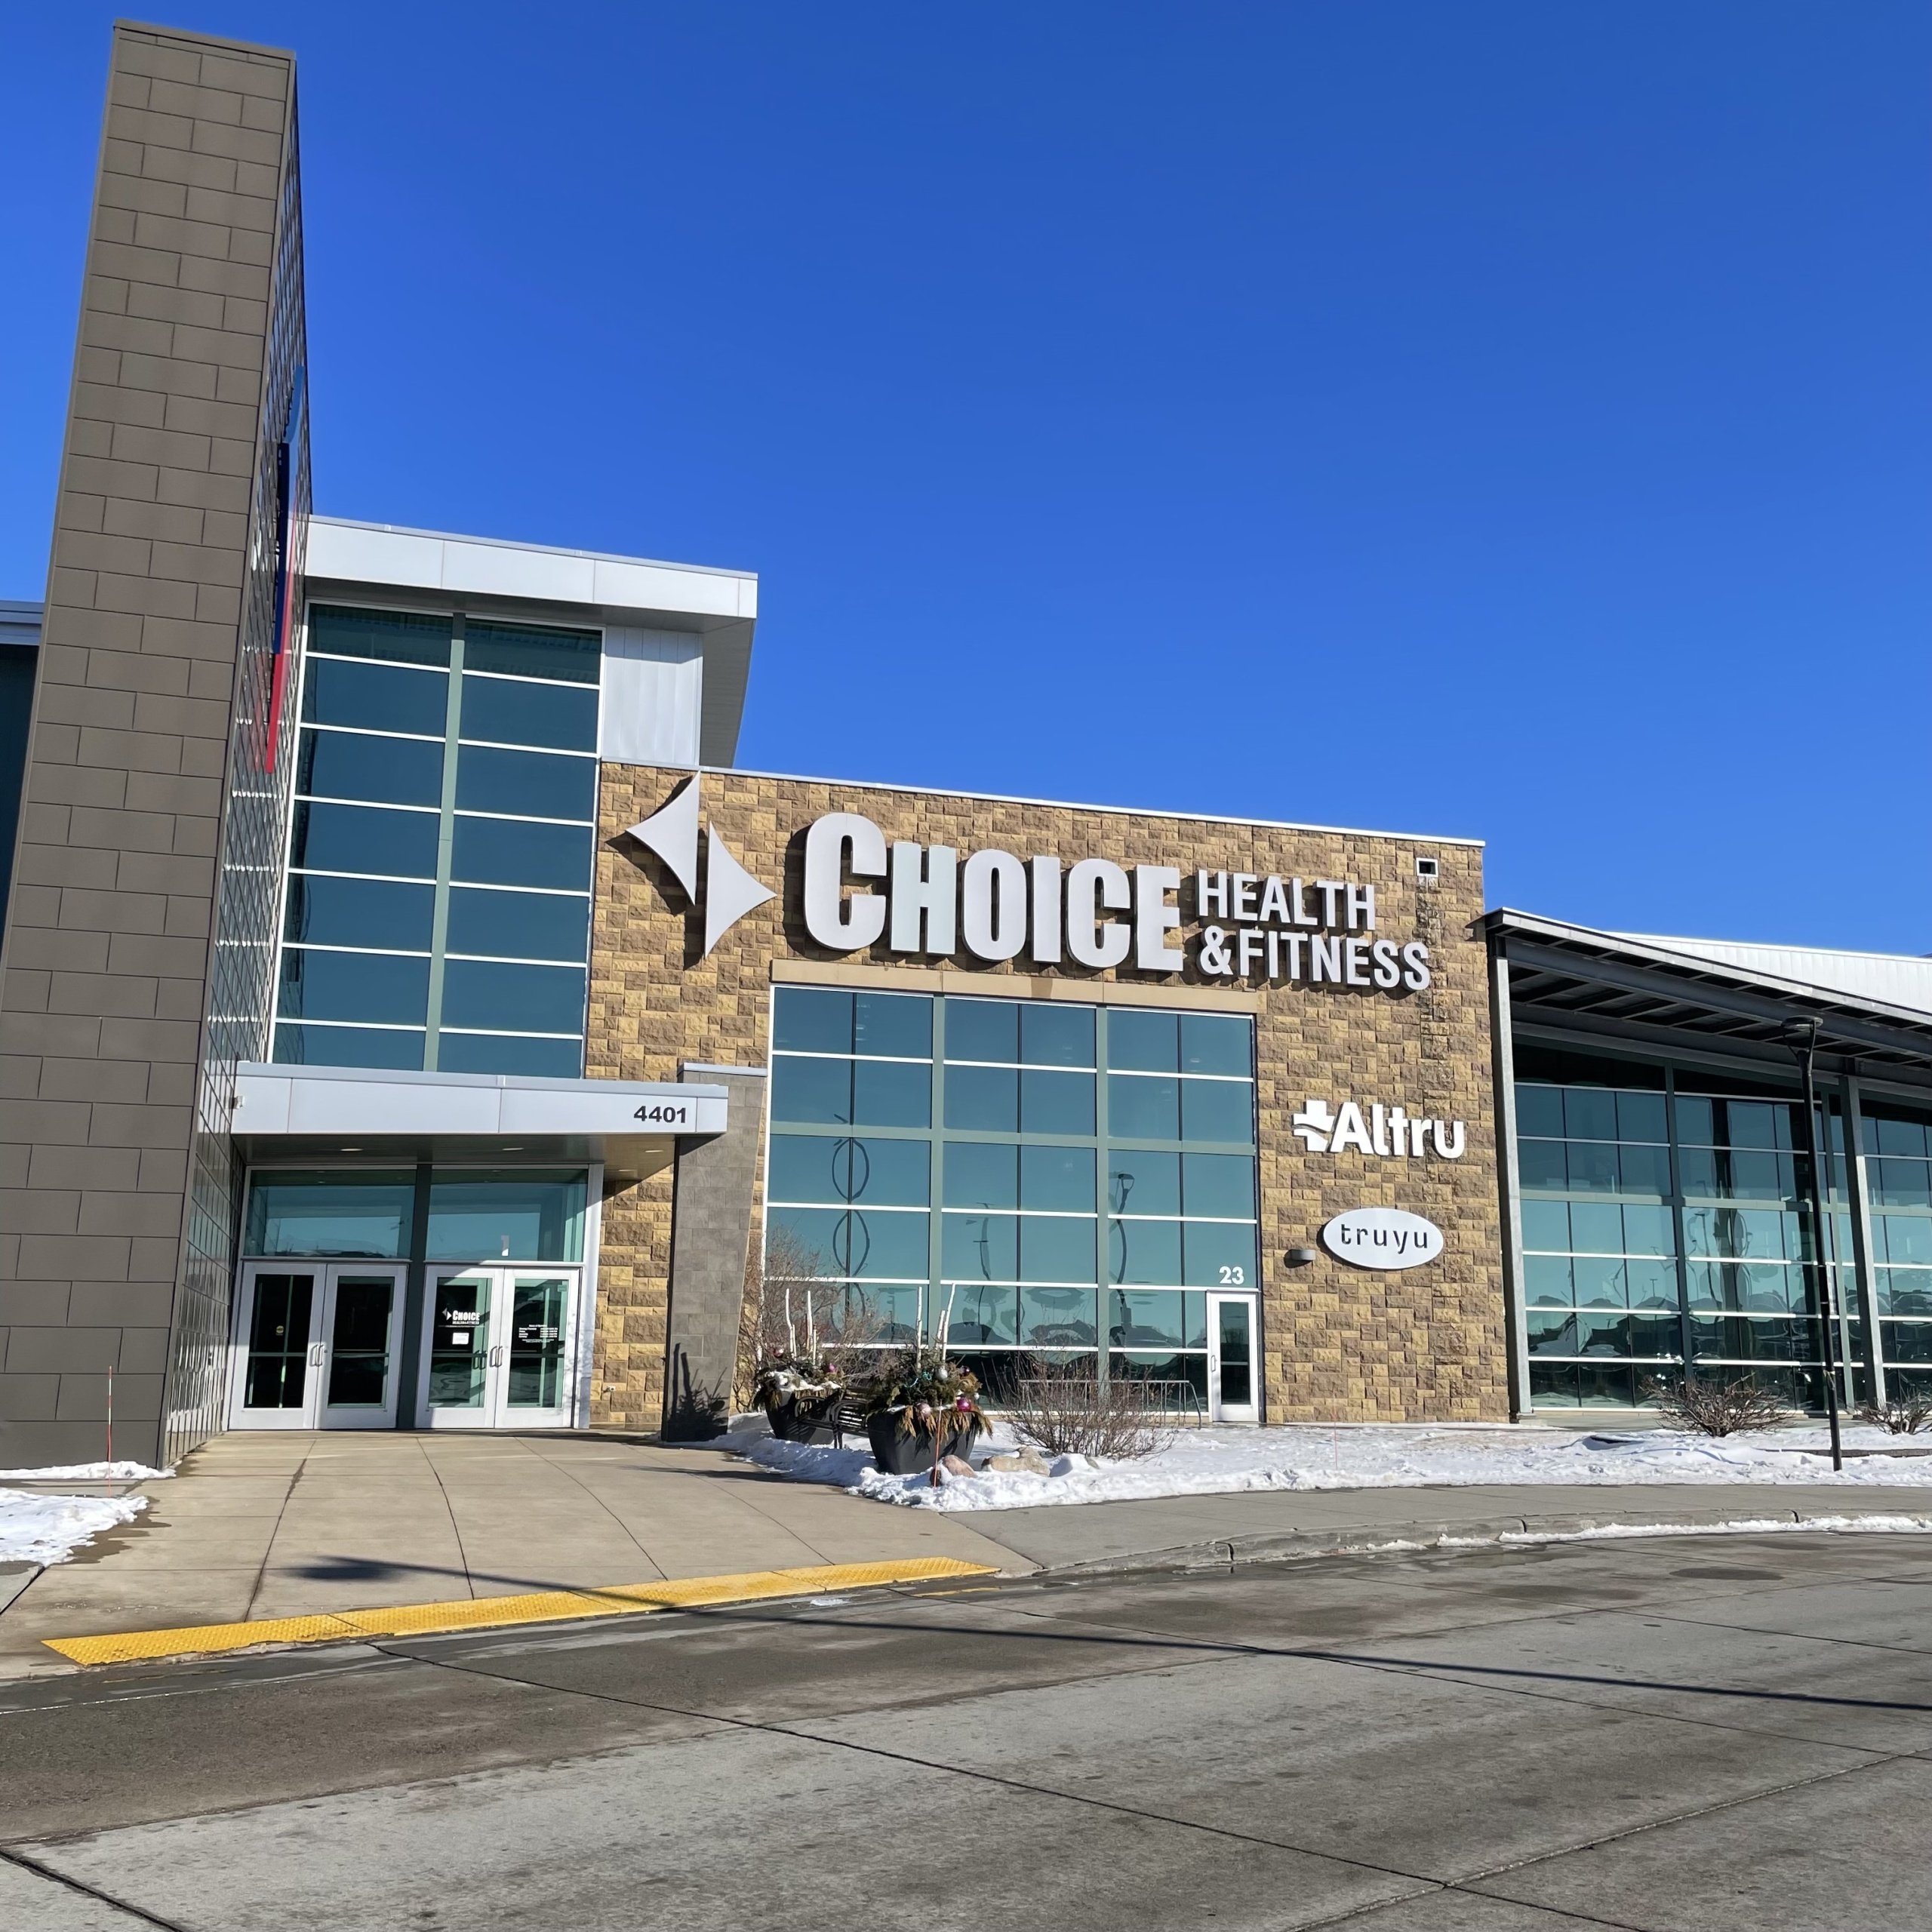 The exterior of Choice Health and Fitness